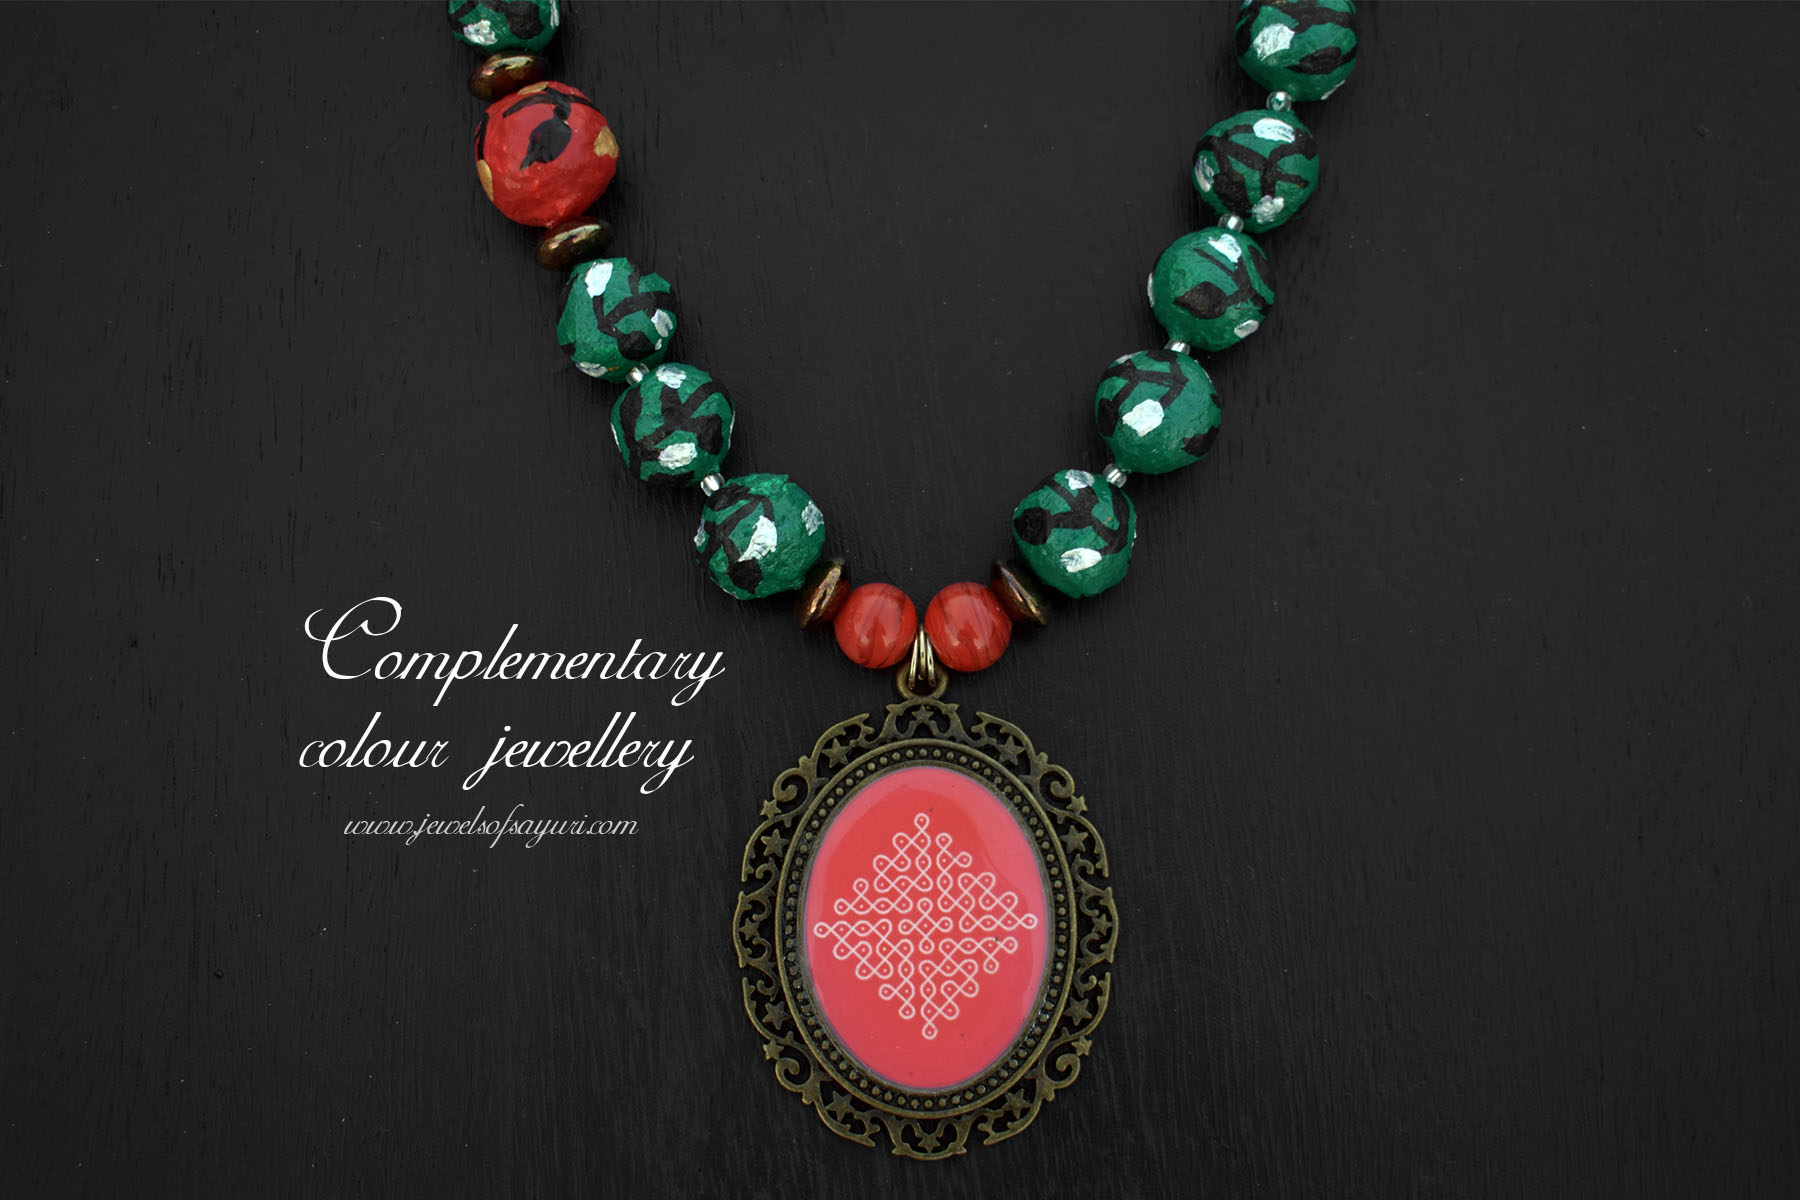 Complementary colour jewellery